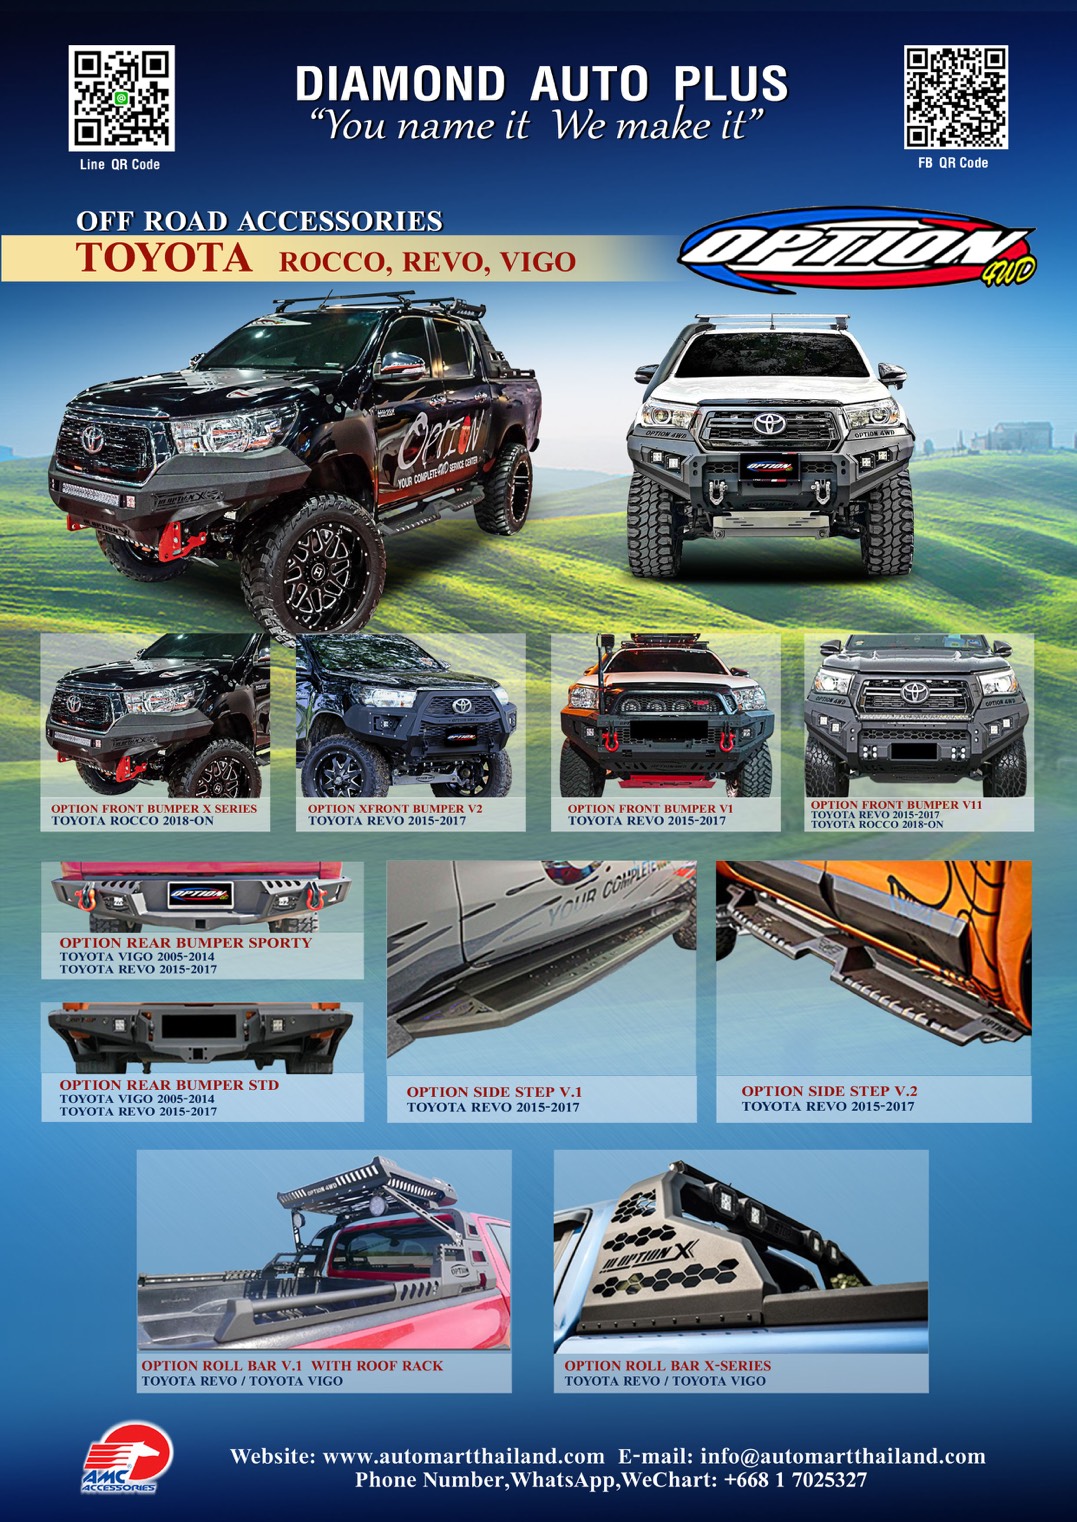 http://www.automartthailand.com/Product/Products/2.%20Products%20By%20Categories/15.%204x4%20Accessories/1.%20Option%204x4%20Accessories/2.%20Option%204x4%20Accessories.jpg